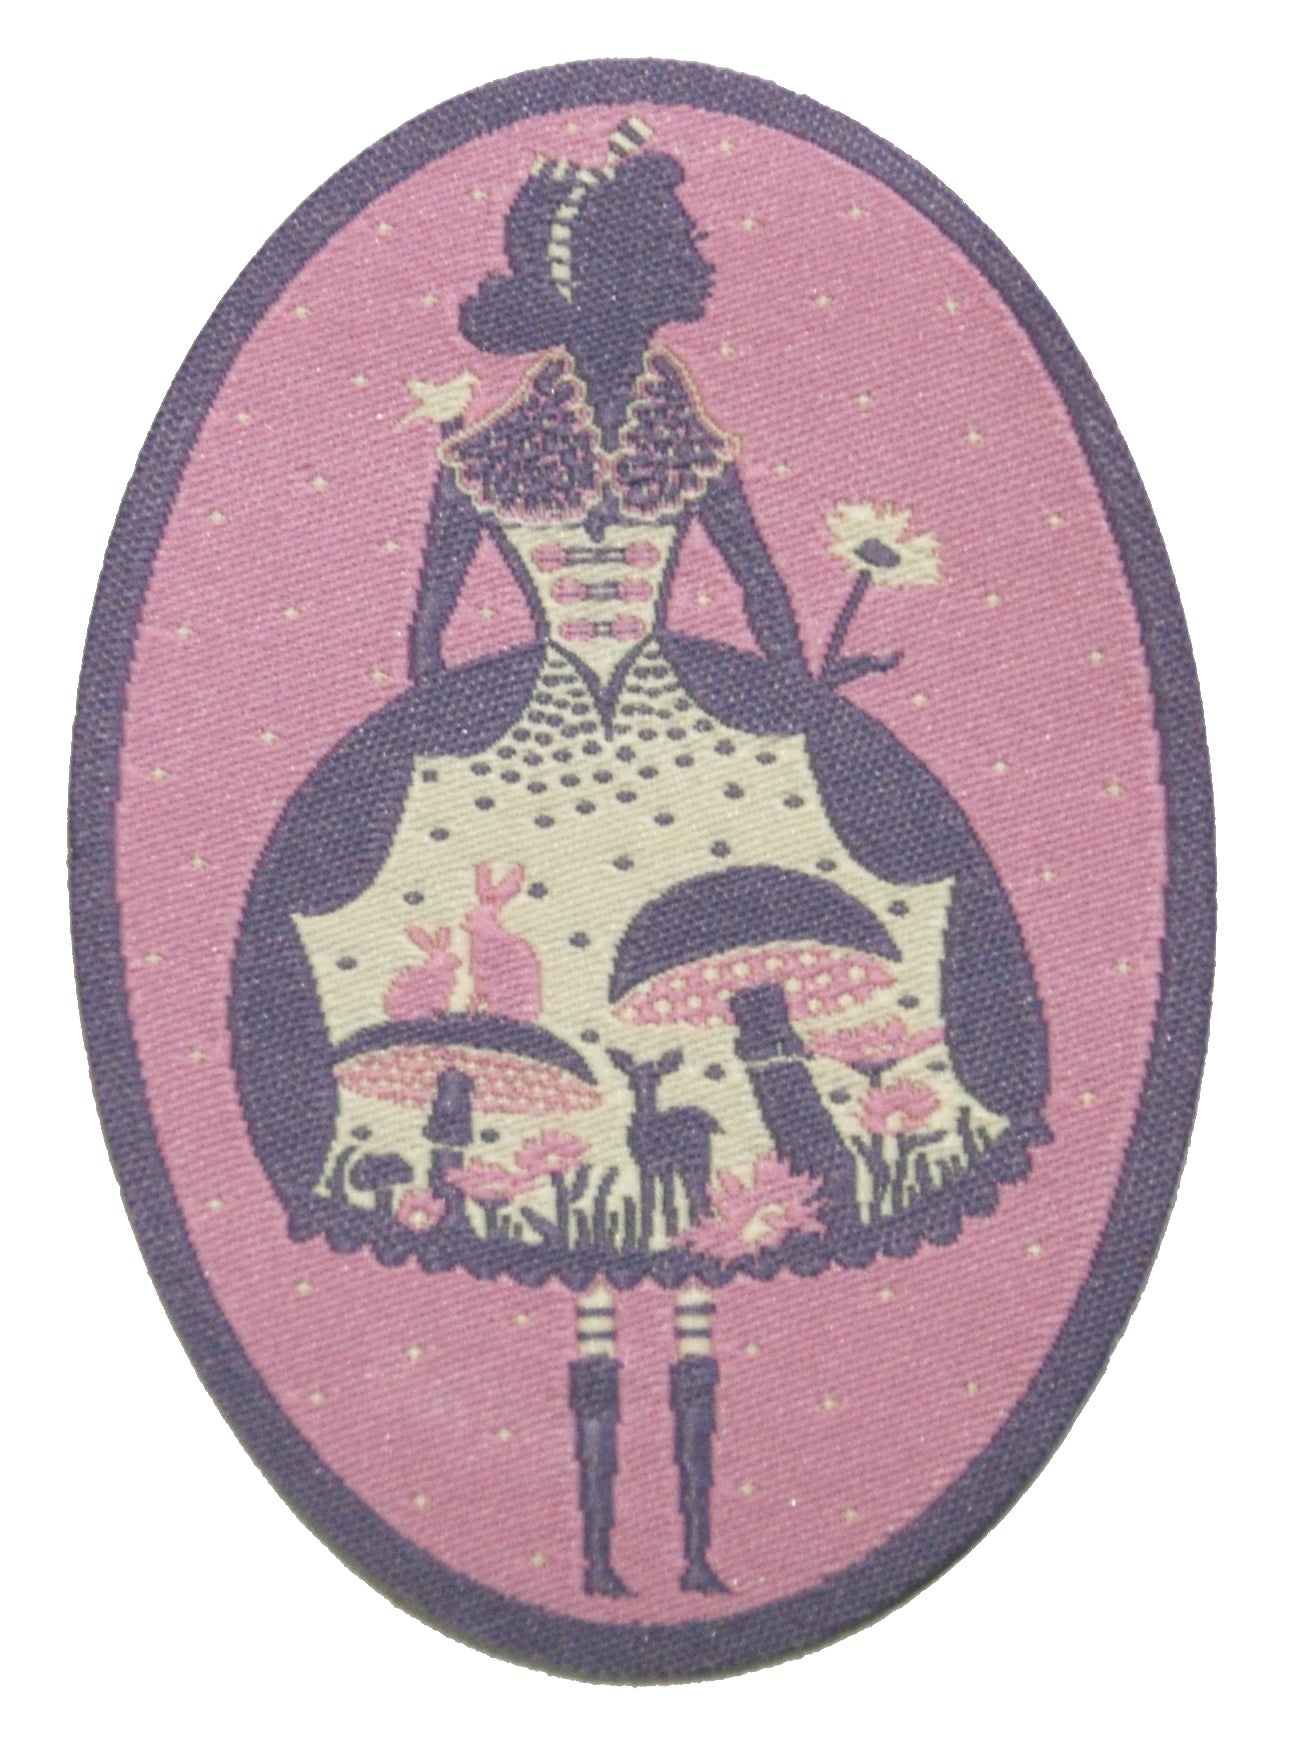 Orchid pink, grey and white oval patch with Alice in Wonderland design